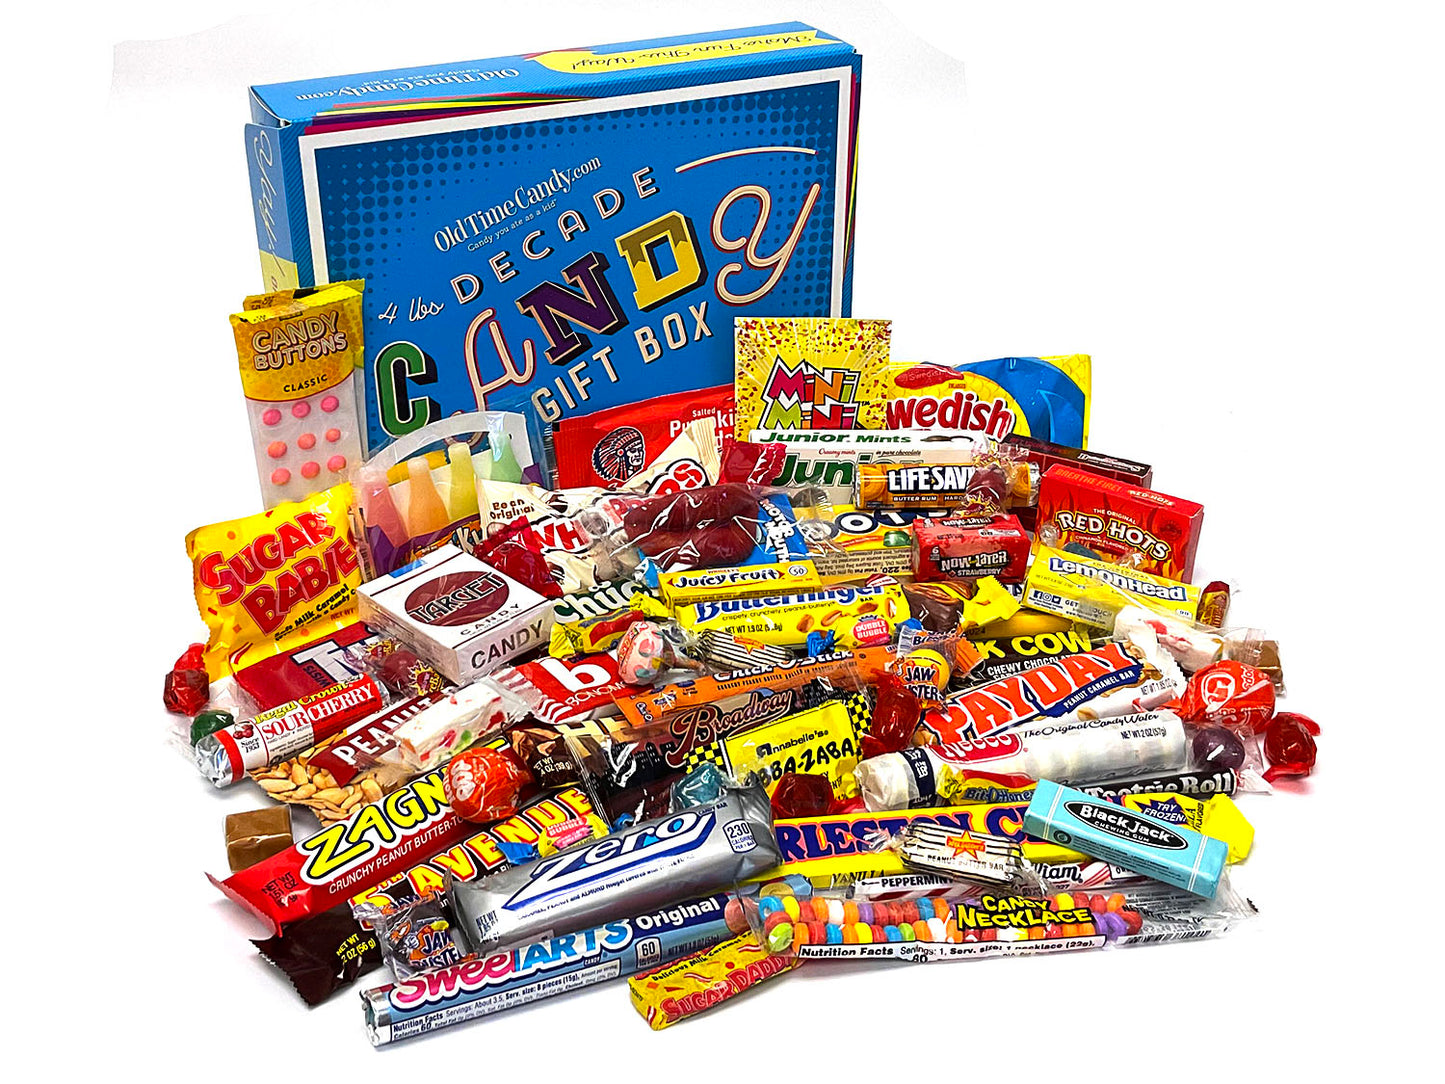 Buy wholesale Bonbon Papa box - For the best of dads: retro 60s candy box